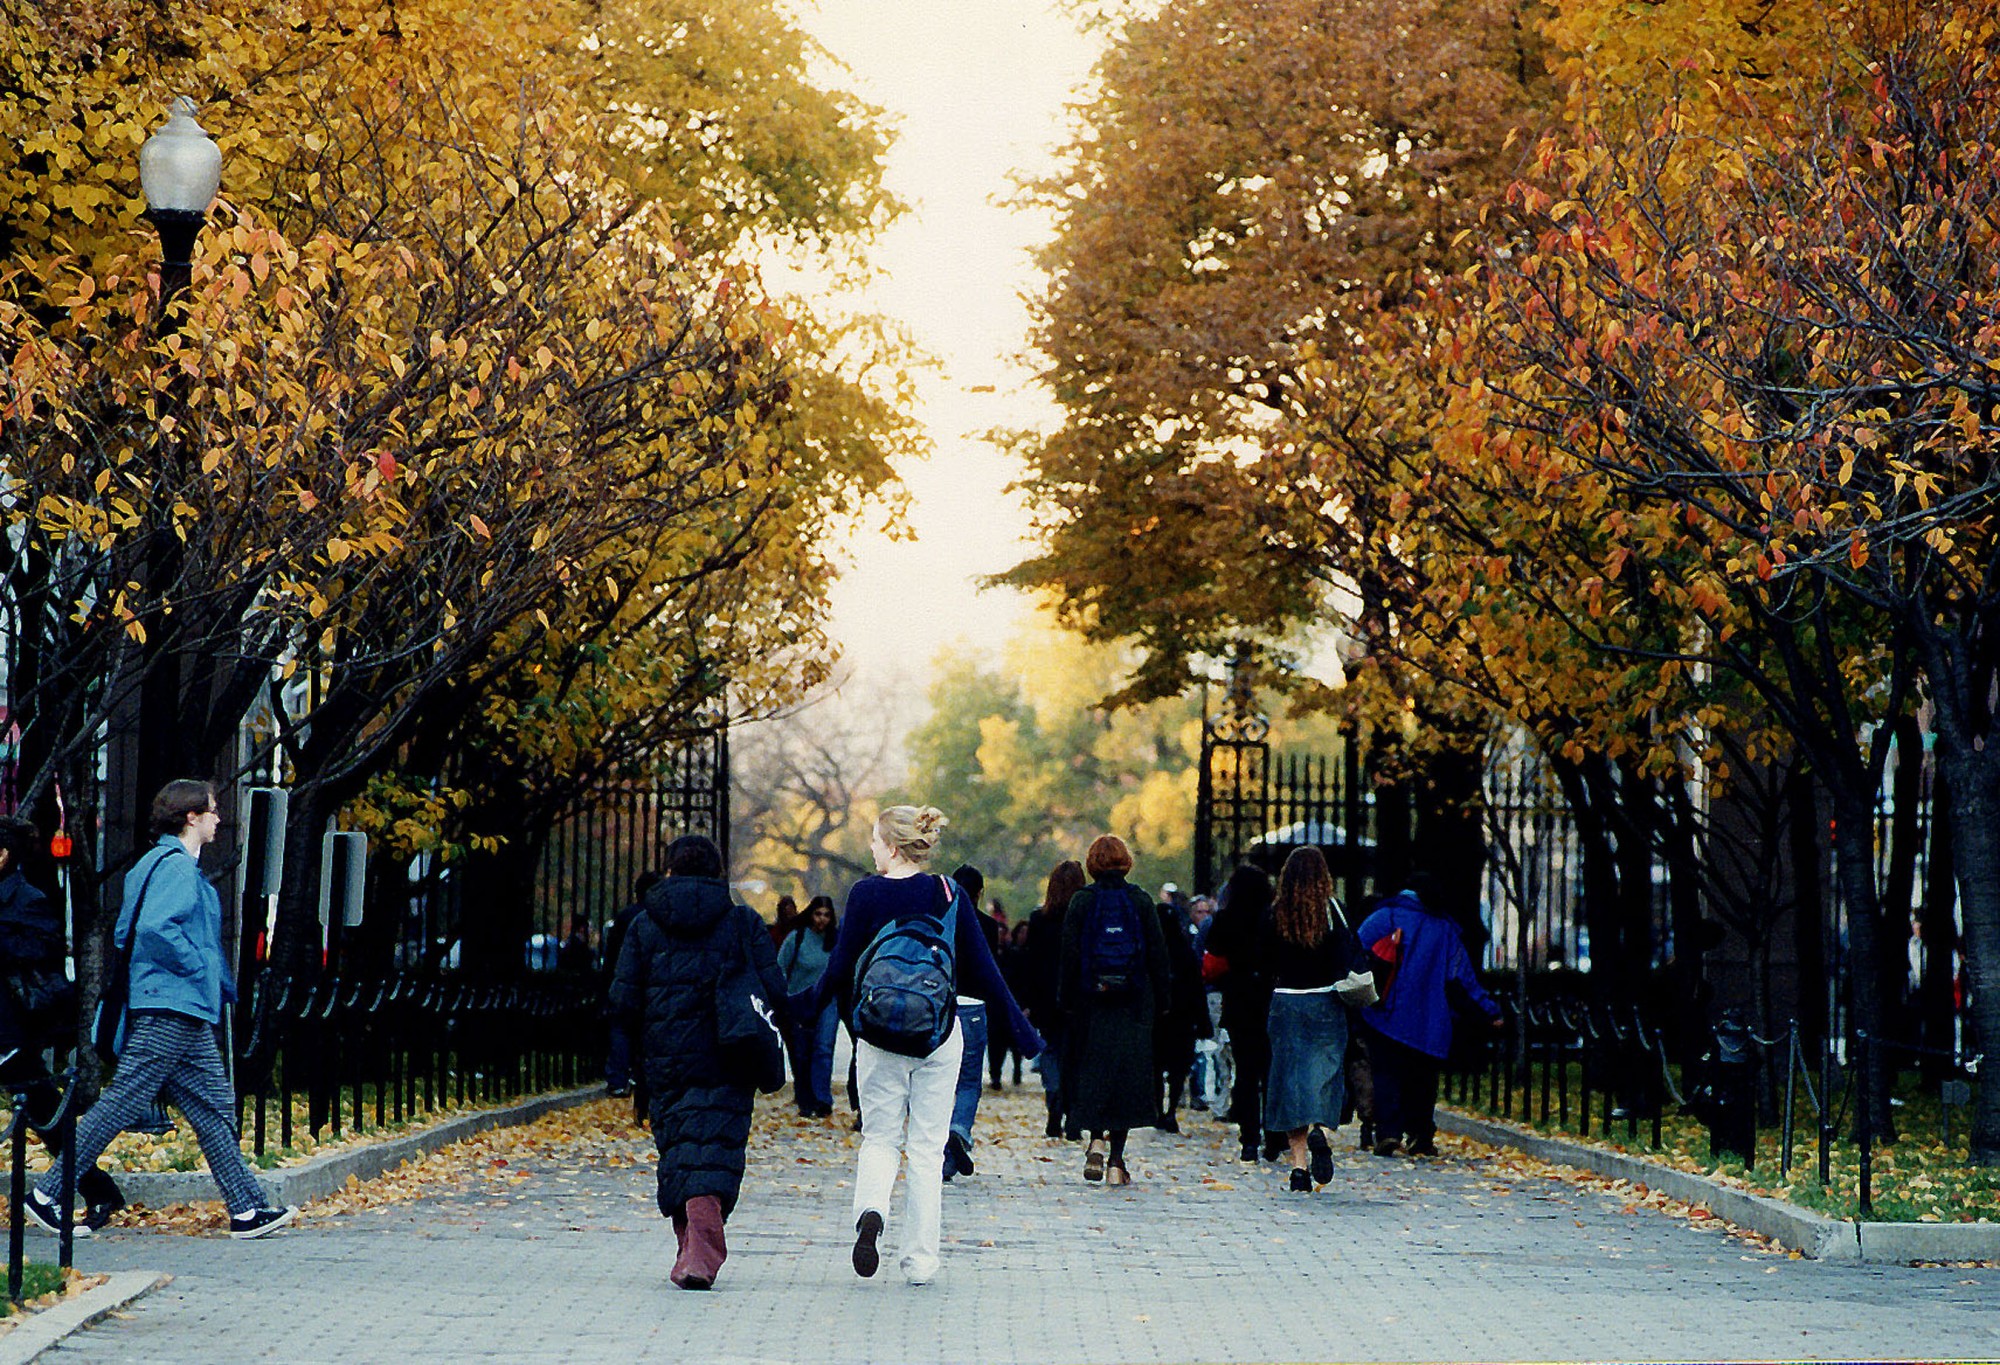 People walking down a wide pathway during autumn. Trees with golden leaves line either side of the path.